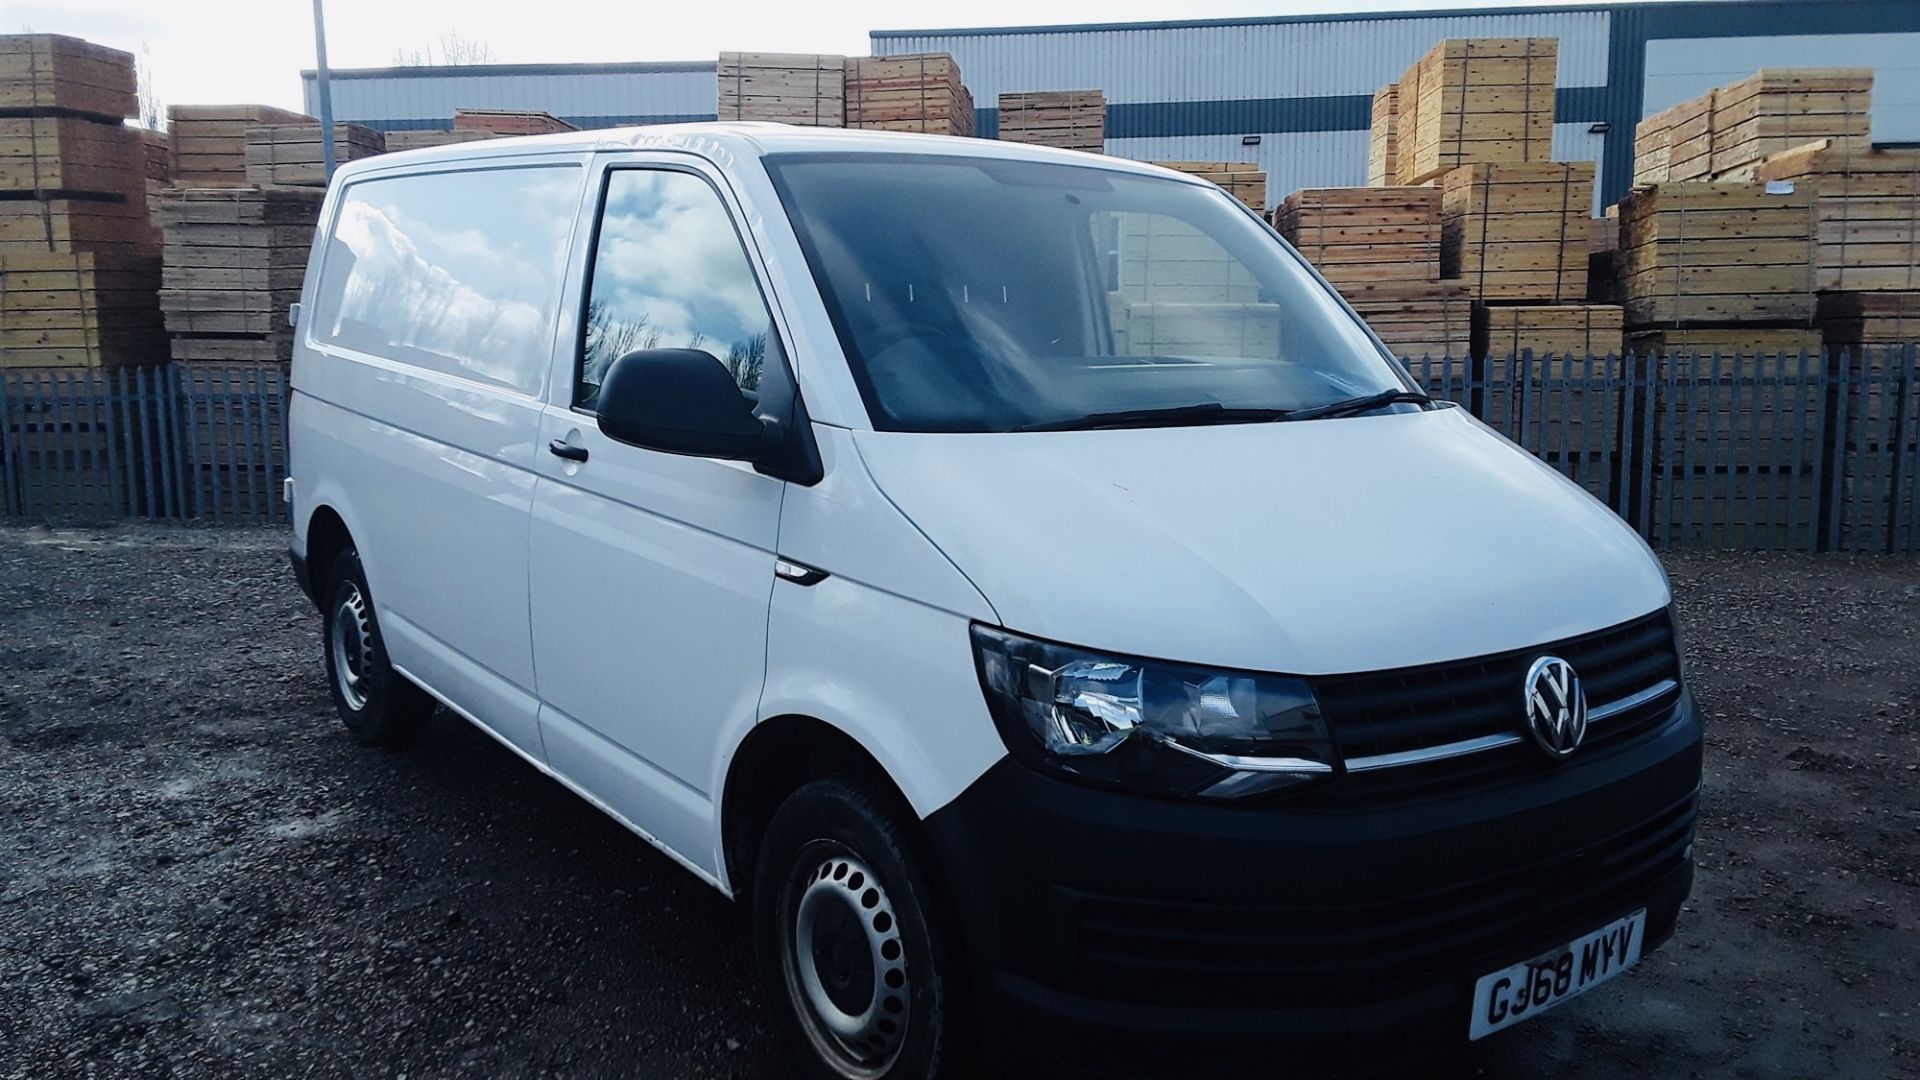 VOLKSWAGEN TRANSPORTER 2.0TDI BMT "BUSINESS EDITION" EURO 6 -68 REG -AIR CON - ONLY 78K